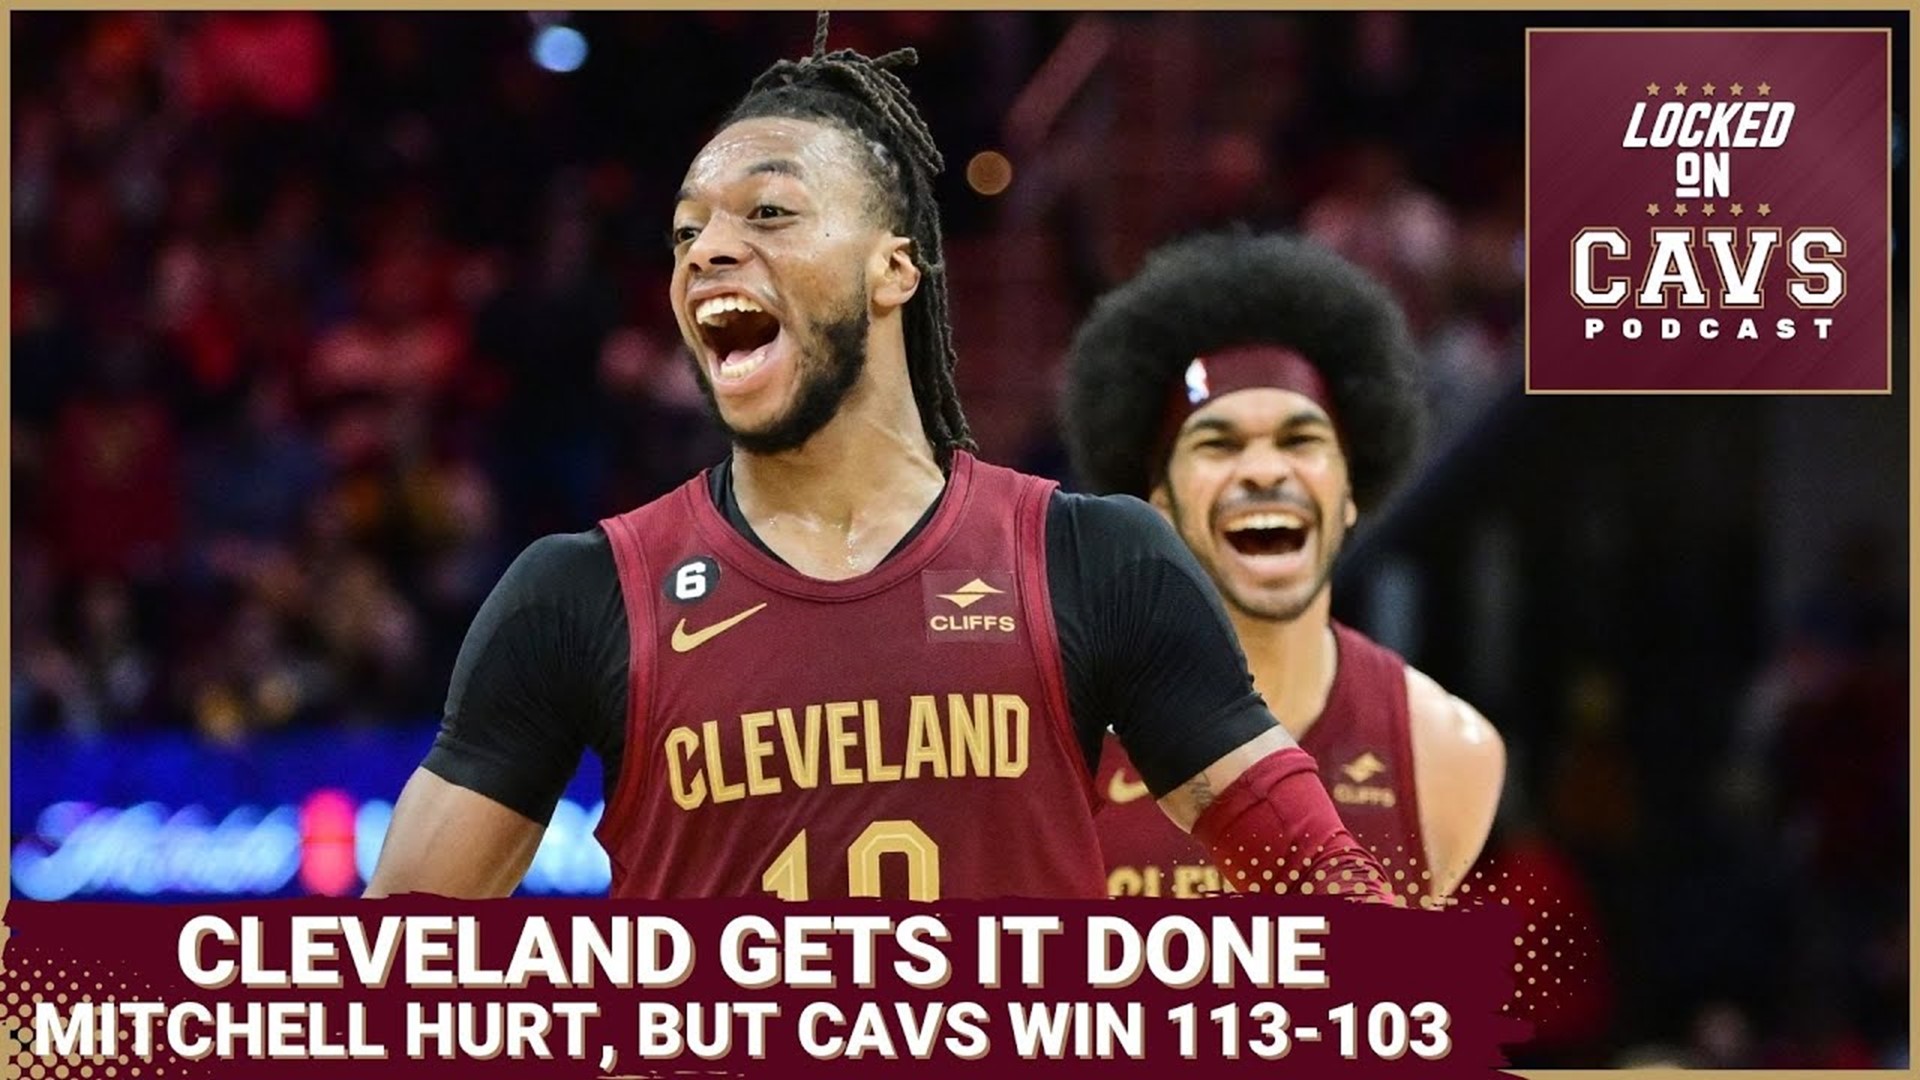 Chris Manning and Evan Dammarell discuss the Cavs’ 113-103 win over the Pelicans by looking at Darius Garland.